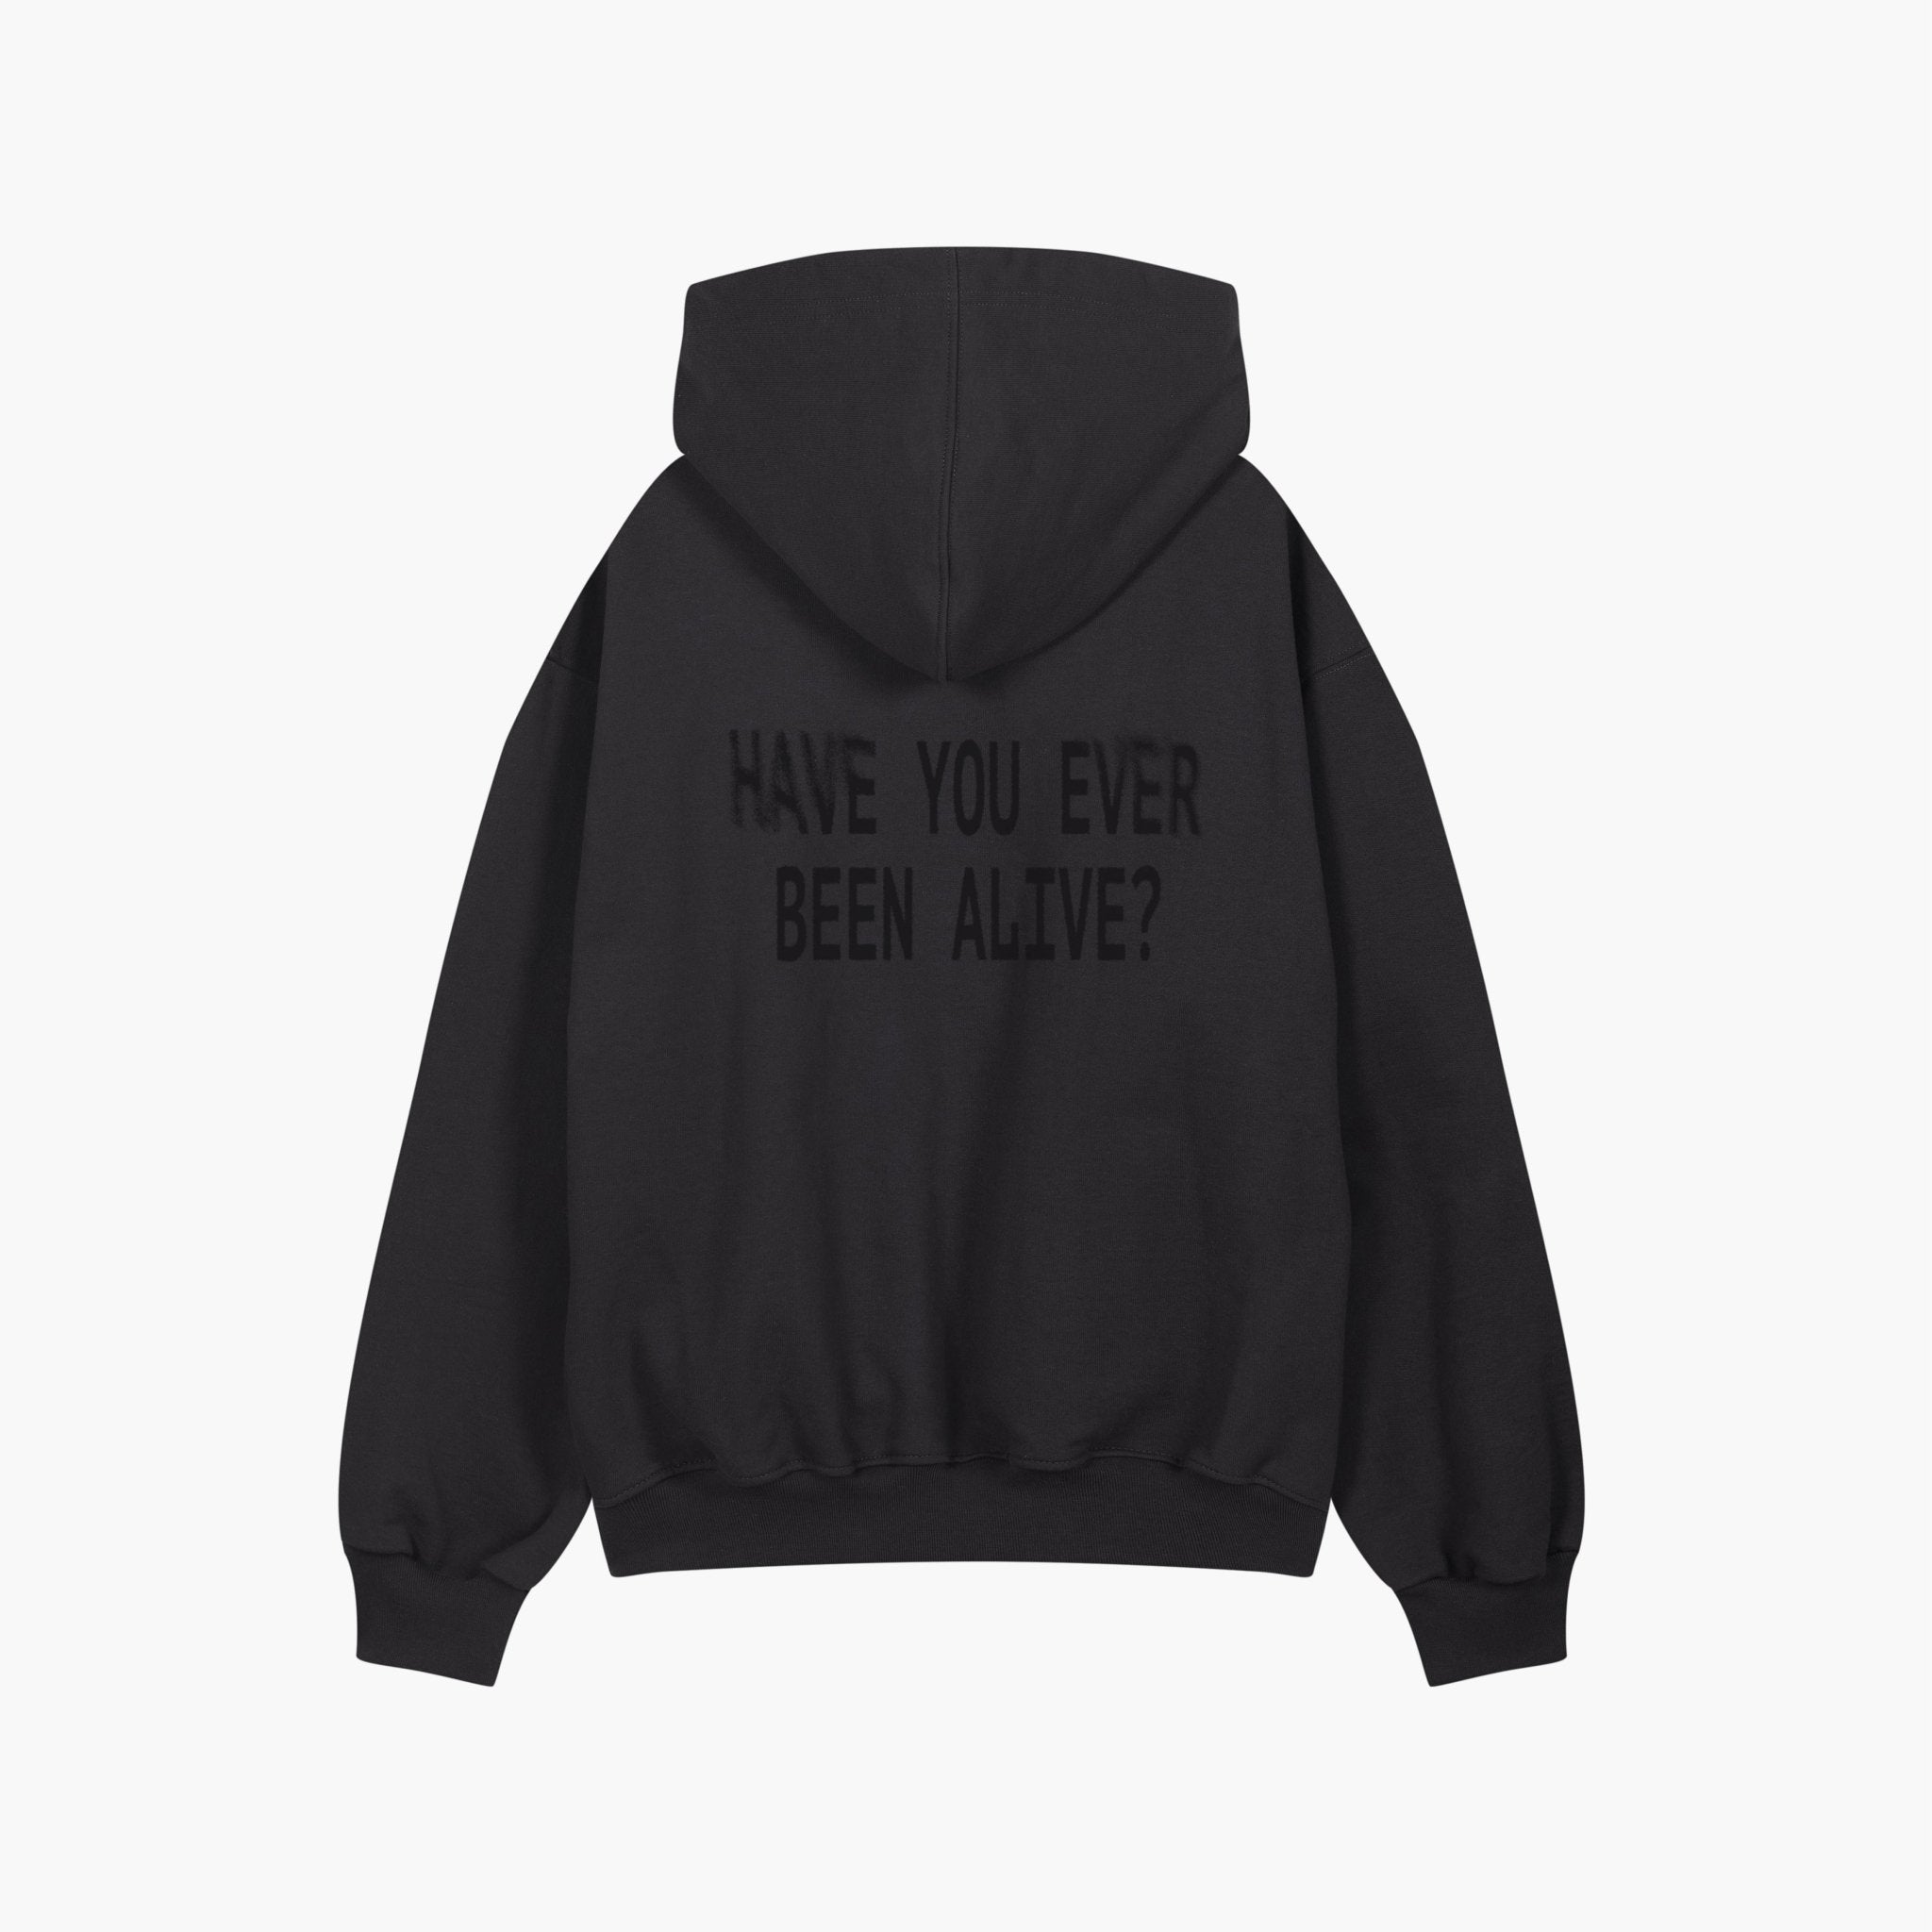 BLUZA HAVE YOU EVER BEEN ALIVE WASHED BLACK - Nous Tous